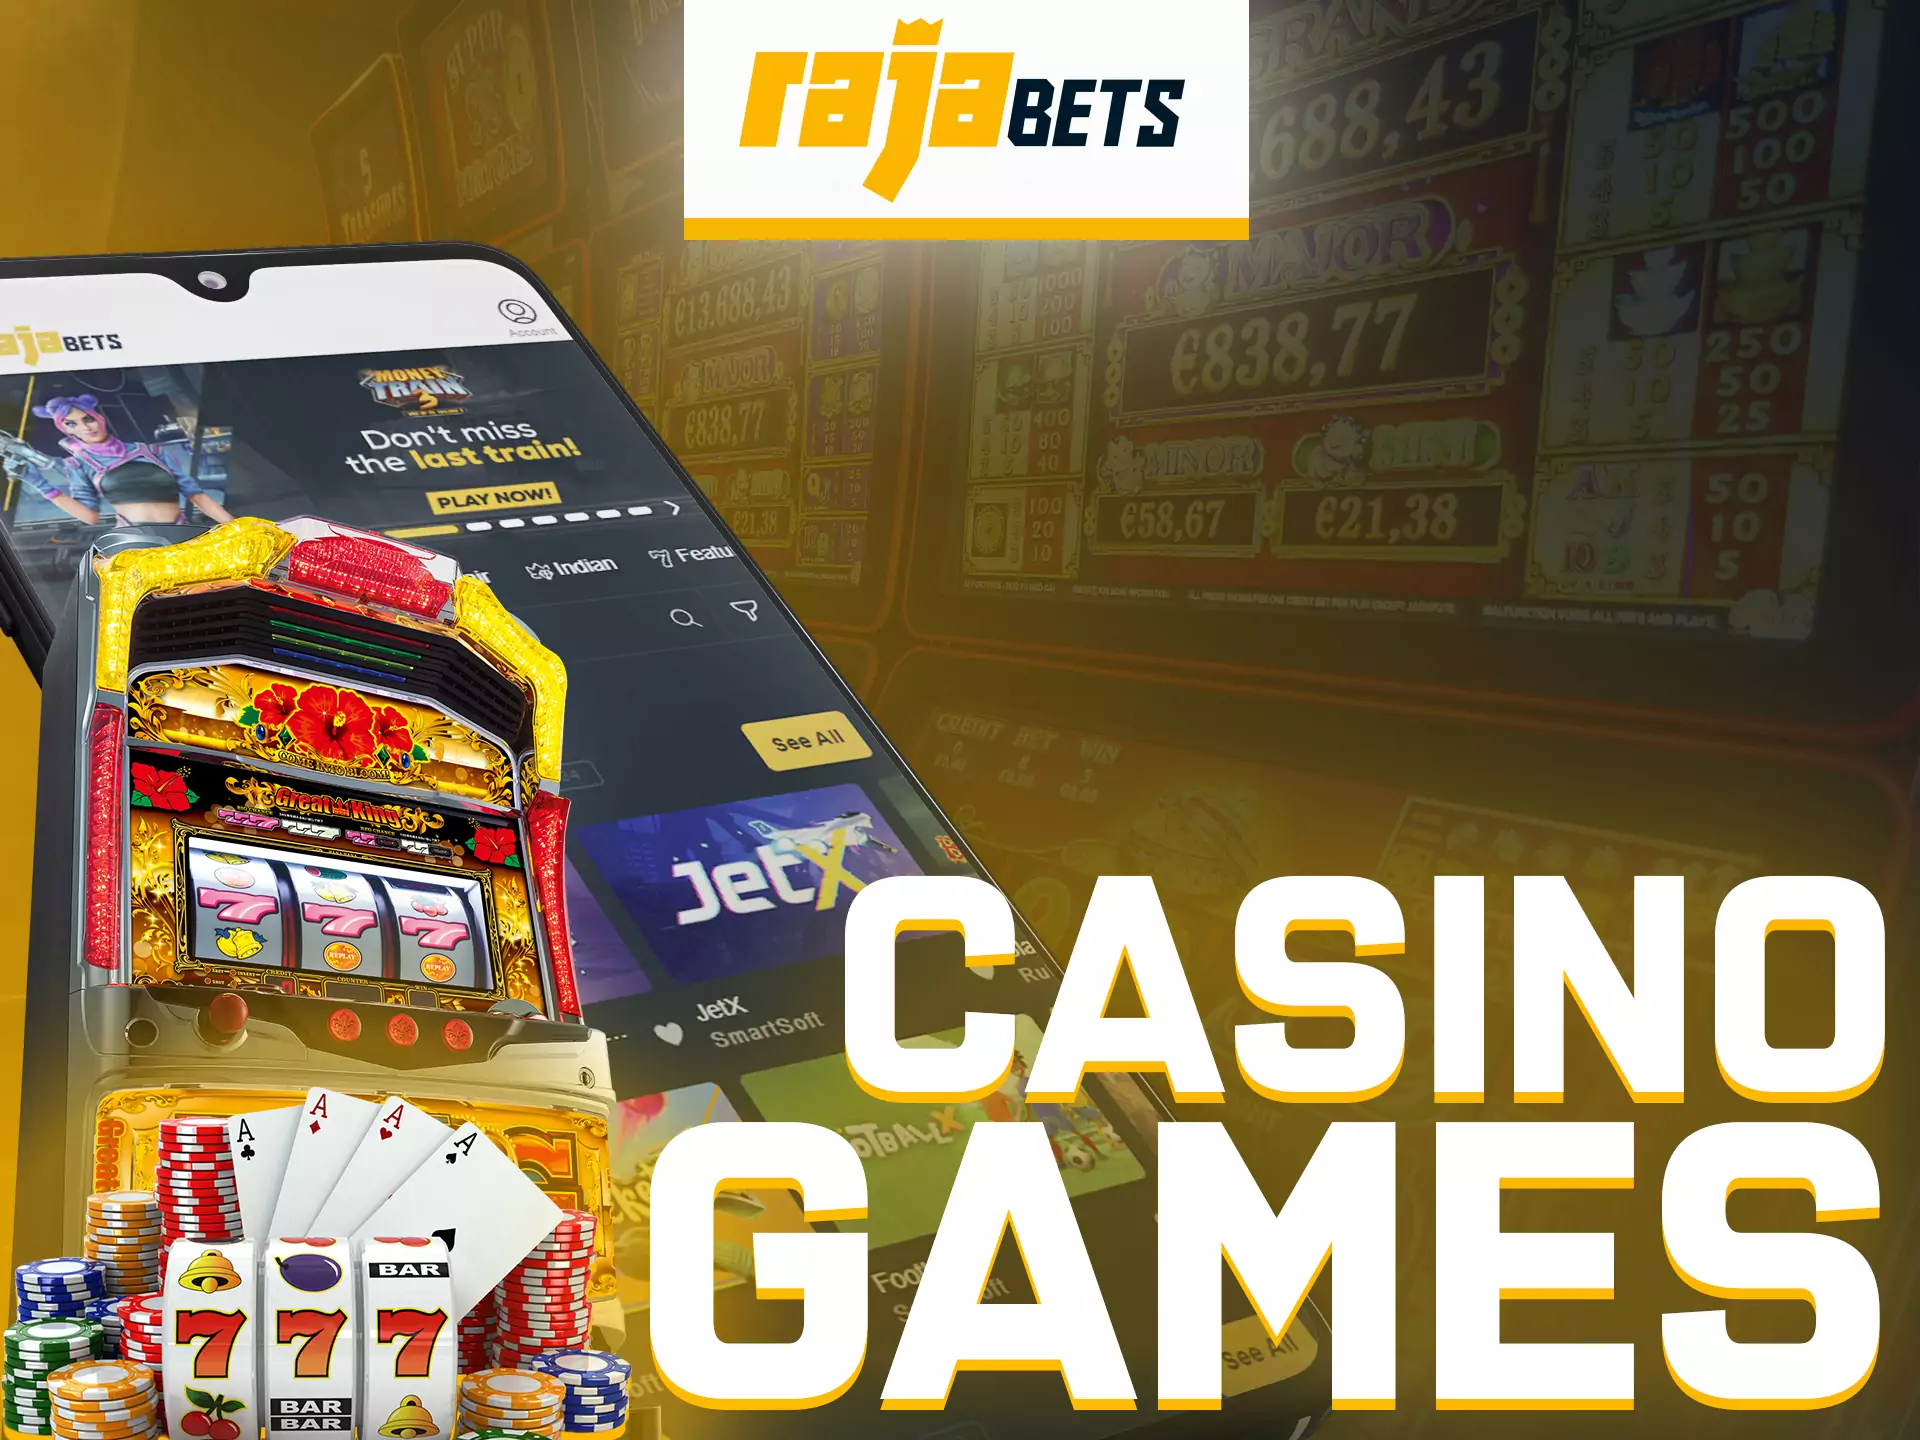 On Rajabets app, go to the casino section and try different games.